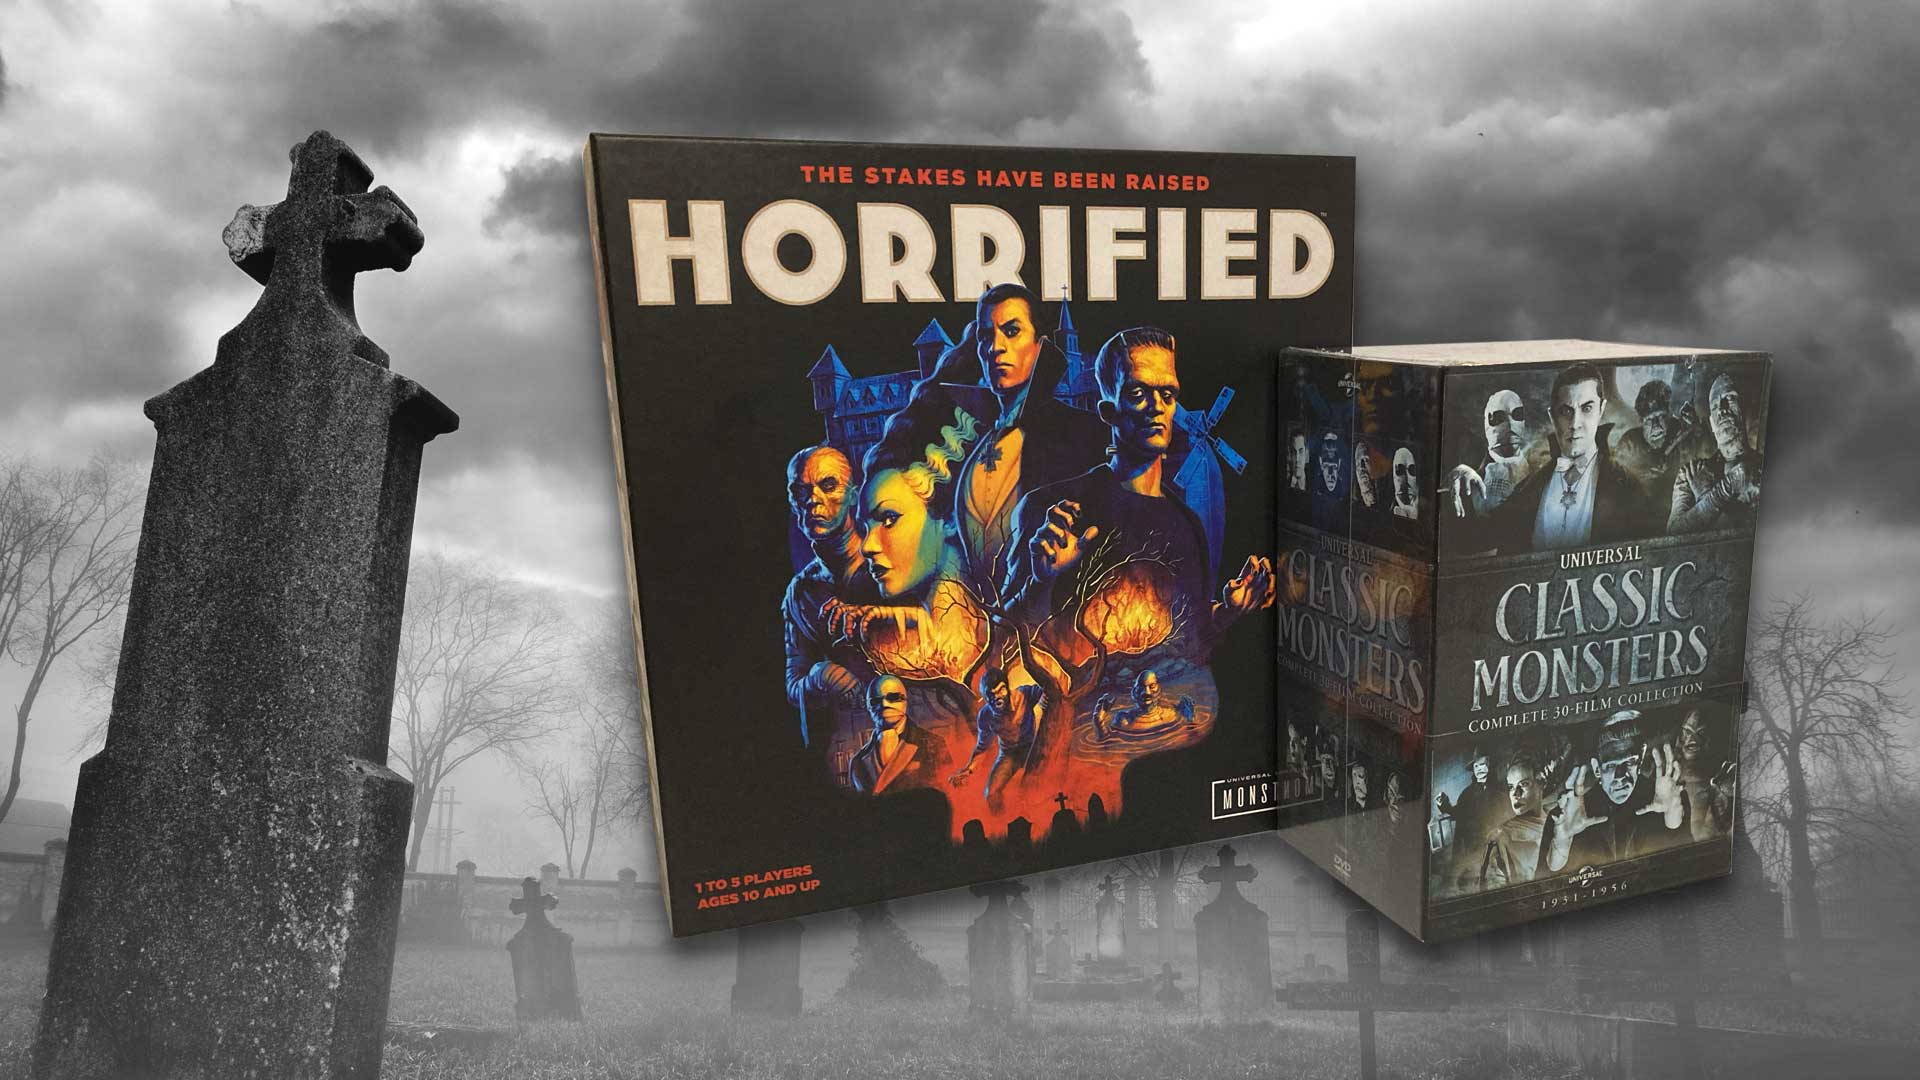 The horrorfied box set is shown in front of a graveyard.